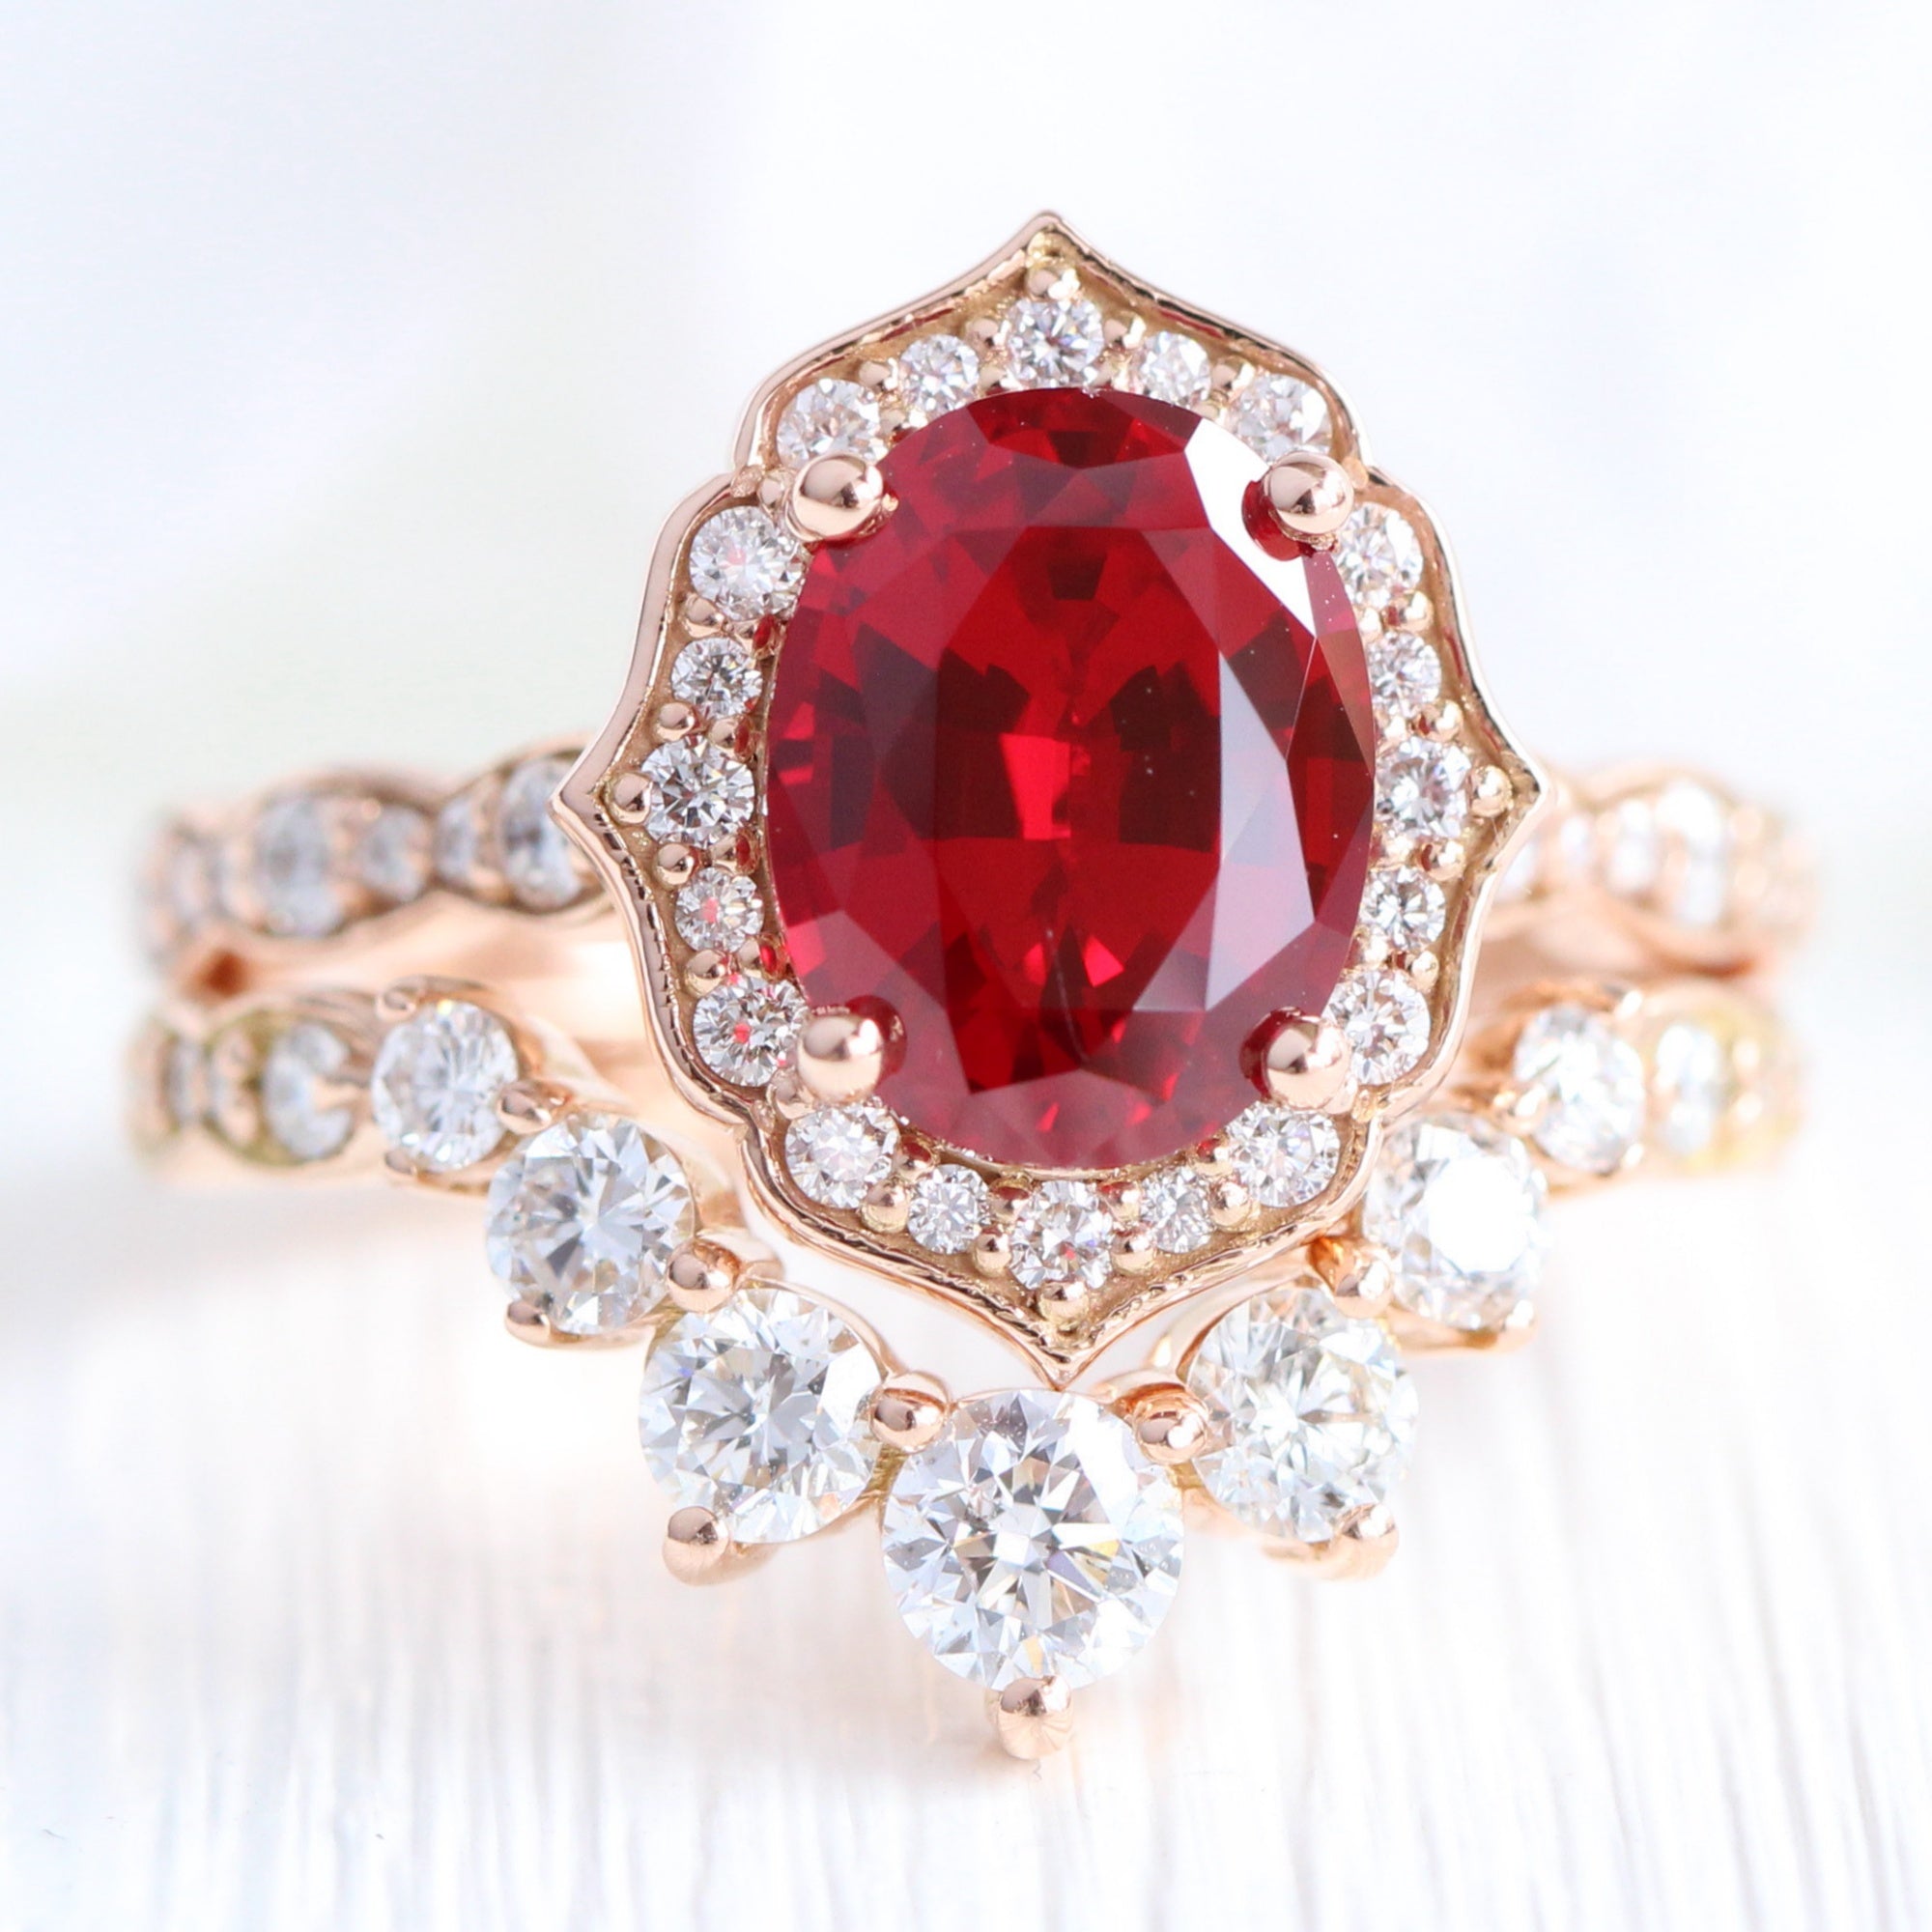 Vintage halo diamond large ruby ring stack rose gold deep curved wedding band la more design jewelry